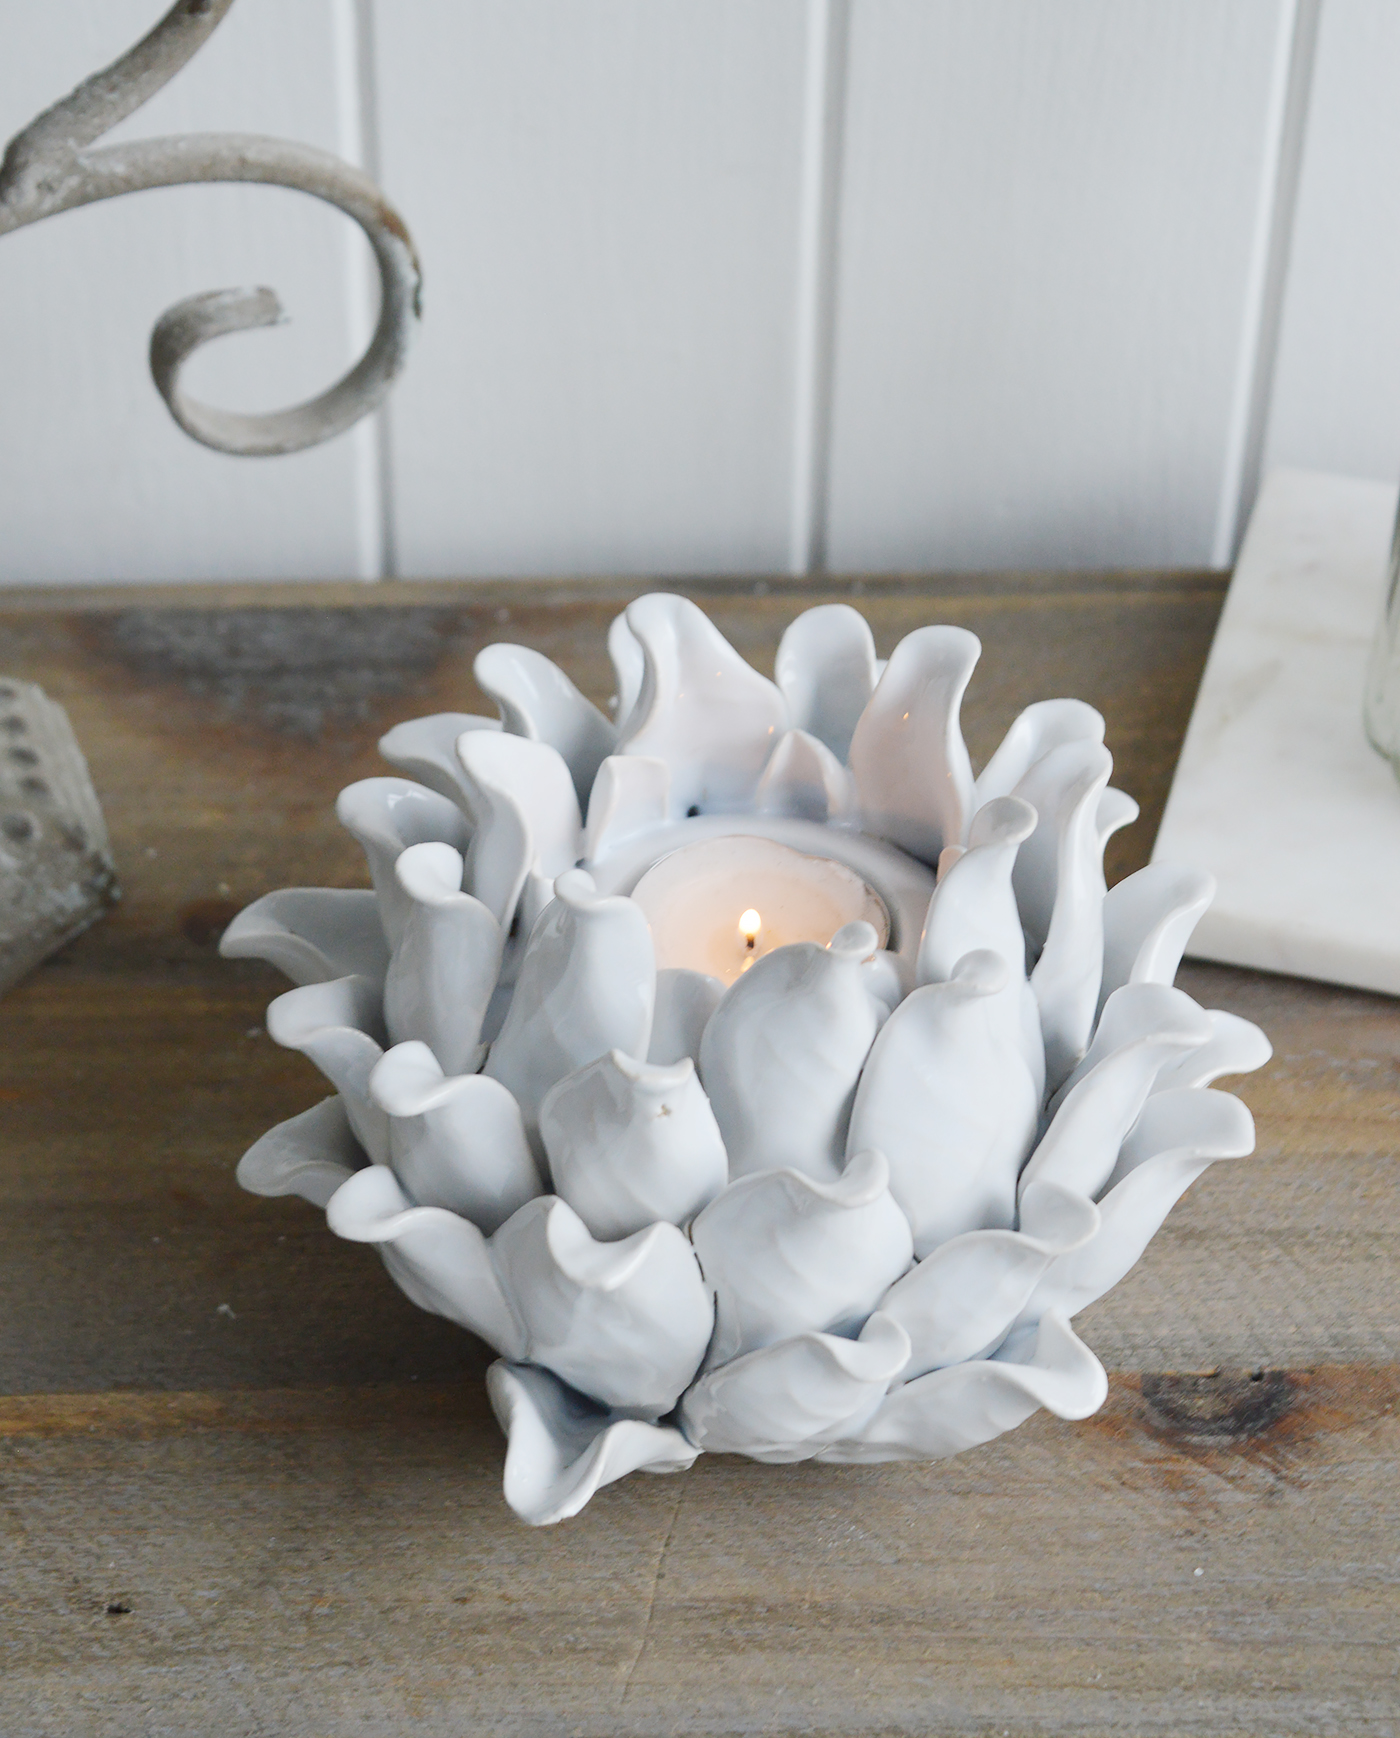 A white flower tea light holder from The White Lighthouse furniture and accessories. New England interiors. Home decor and furniture for coastal, country and city homes